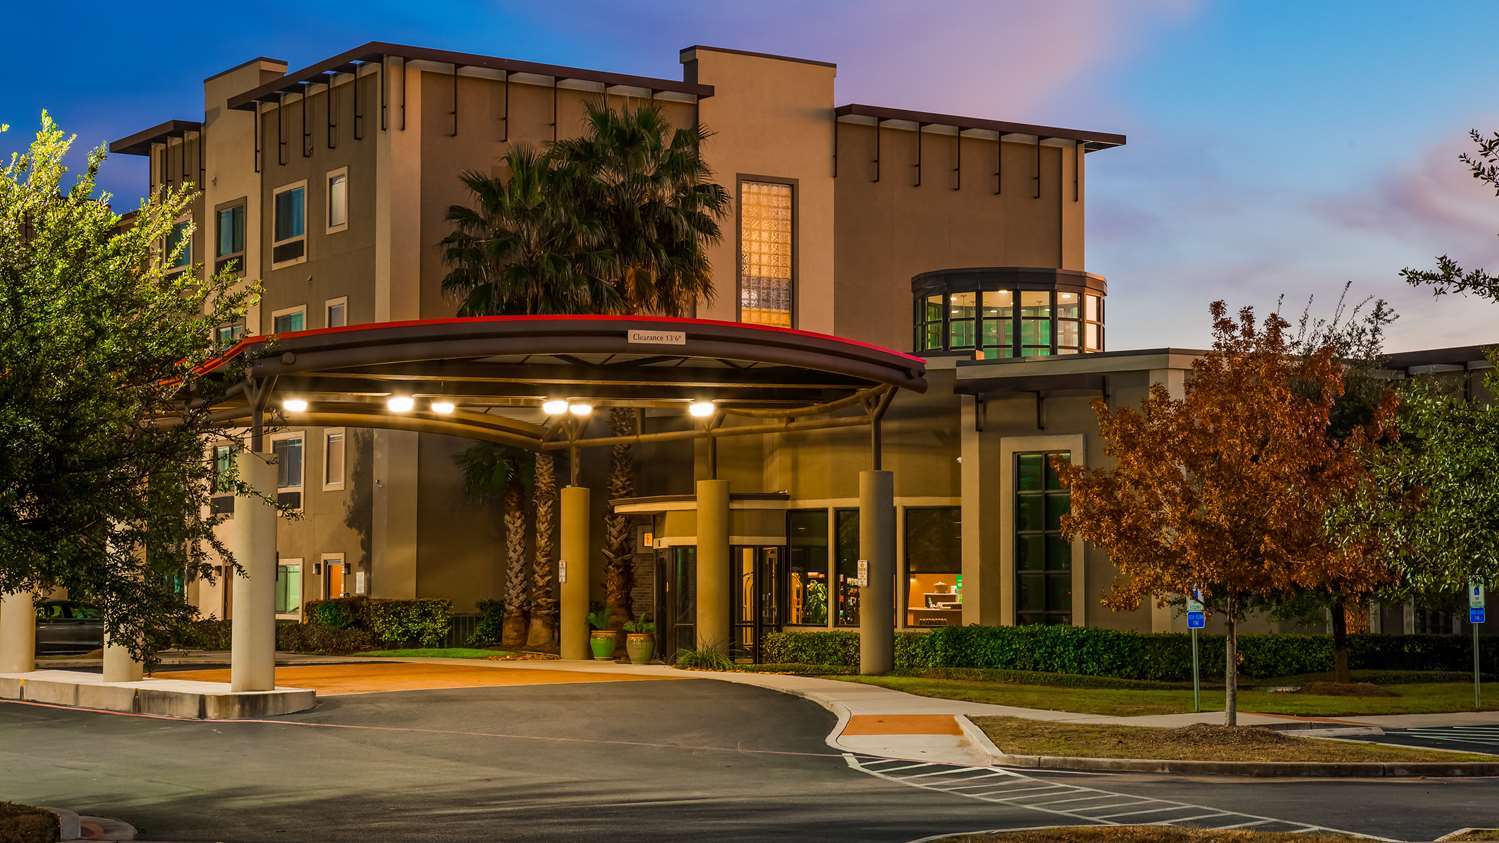 Discount [85% Off] Days Inn Lytle United States - Hotel ...